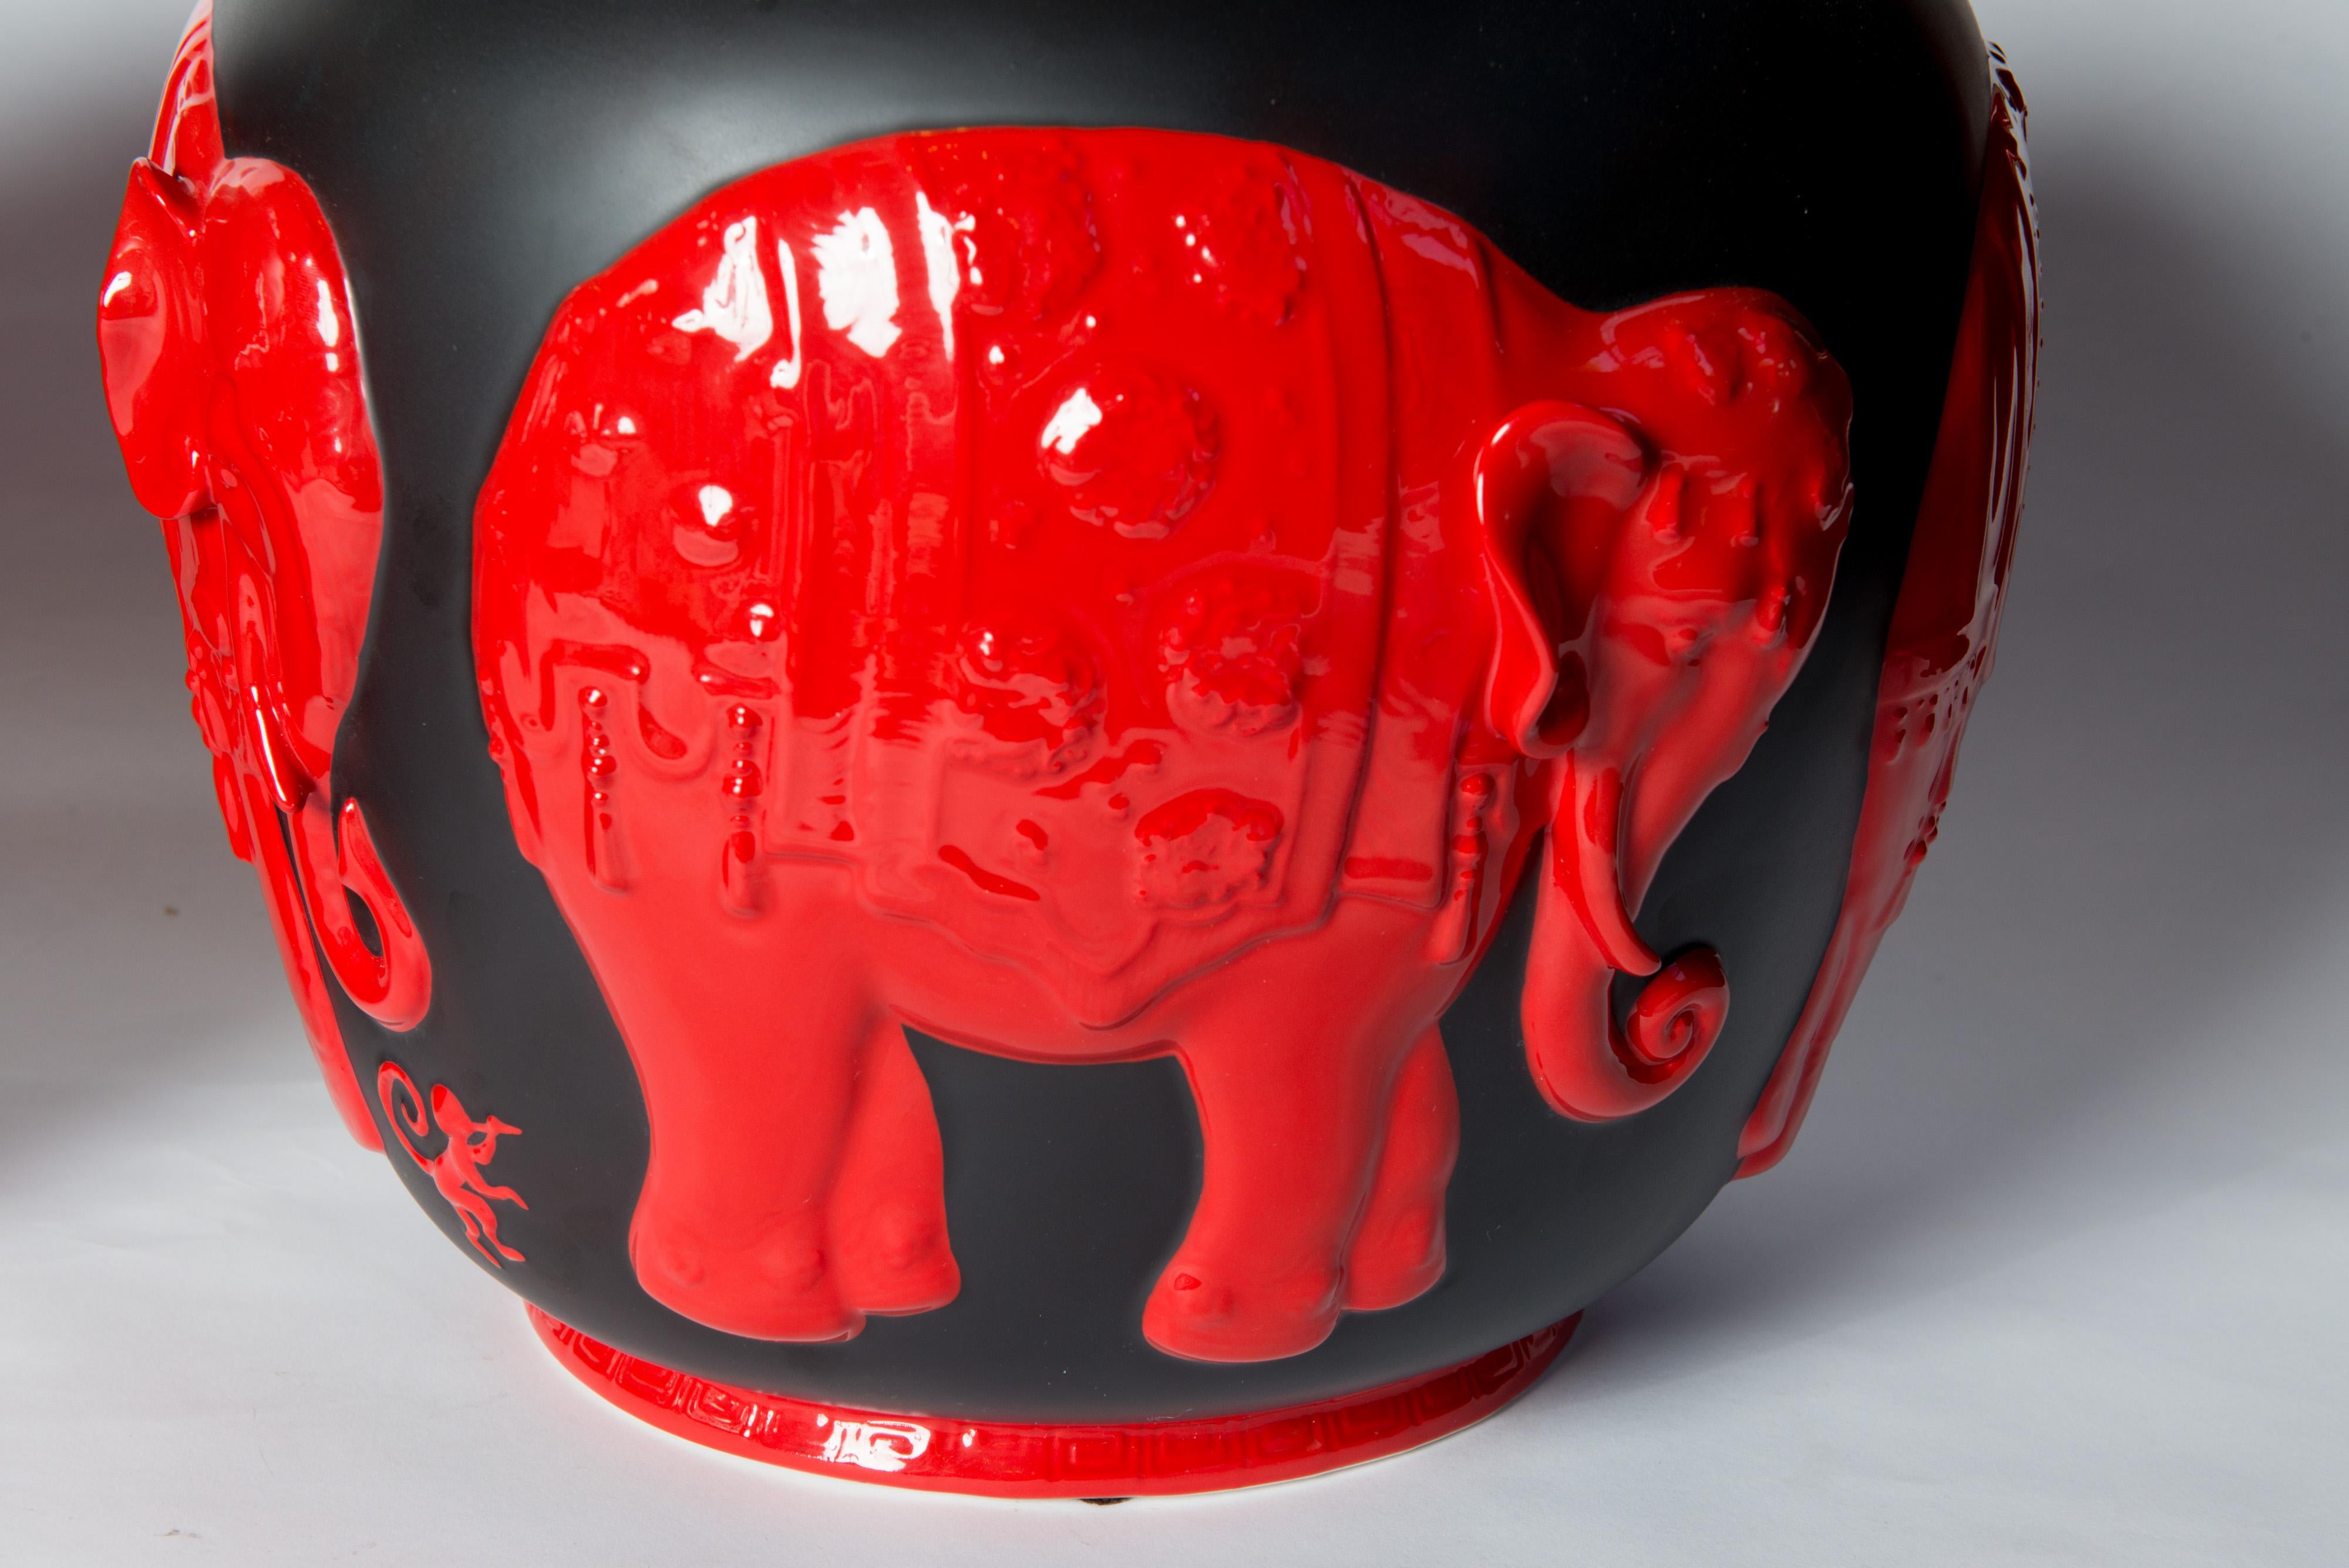 Pair of black and red ceramic elephant lidded ginger jars by Jean Boggio for Franz. Handmade and hand painted.